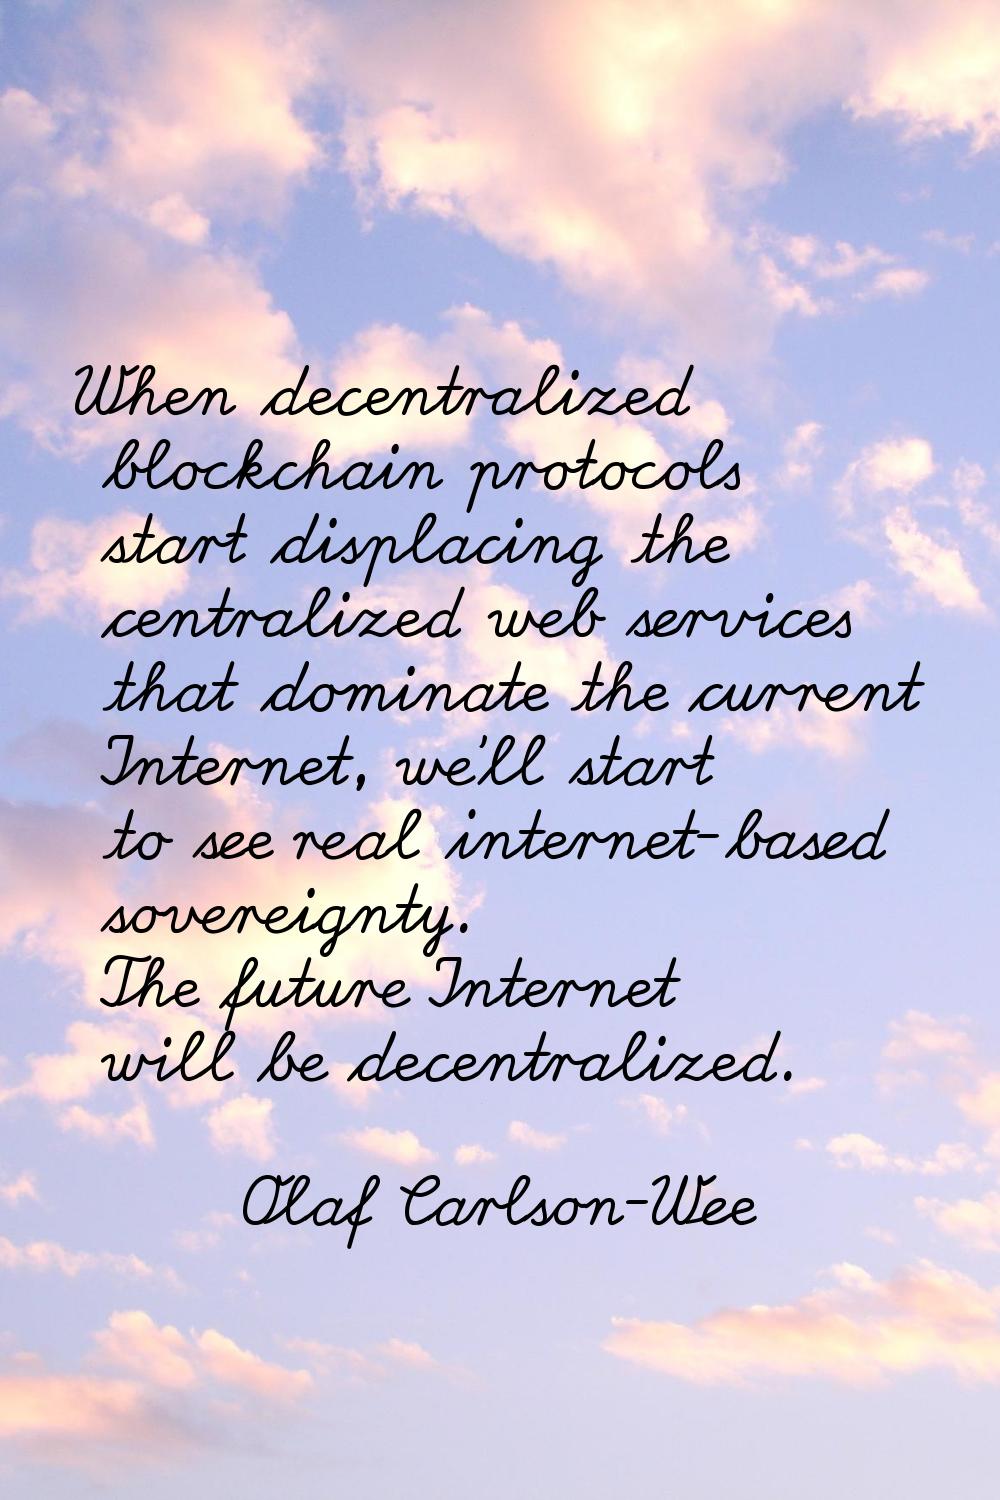 When decentralized blockchain protocols start displacing the centralized web services that dominate